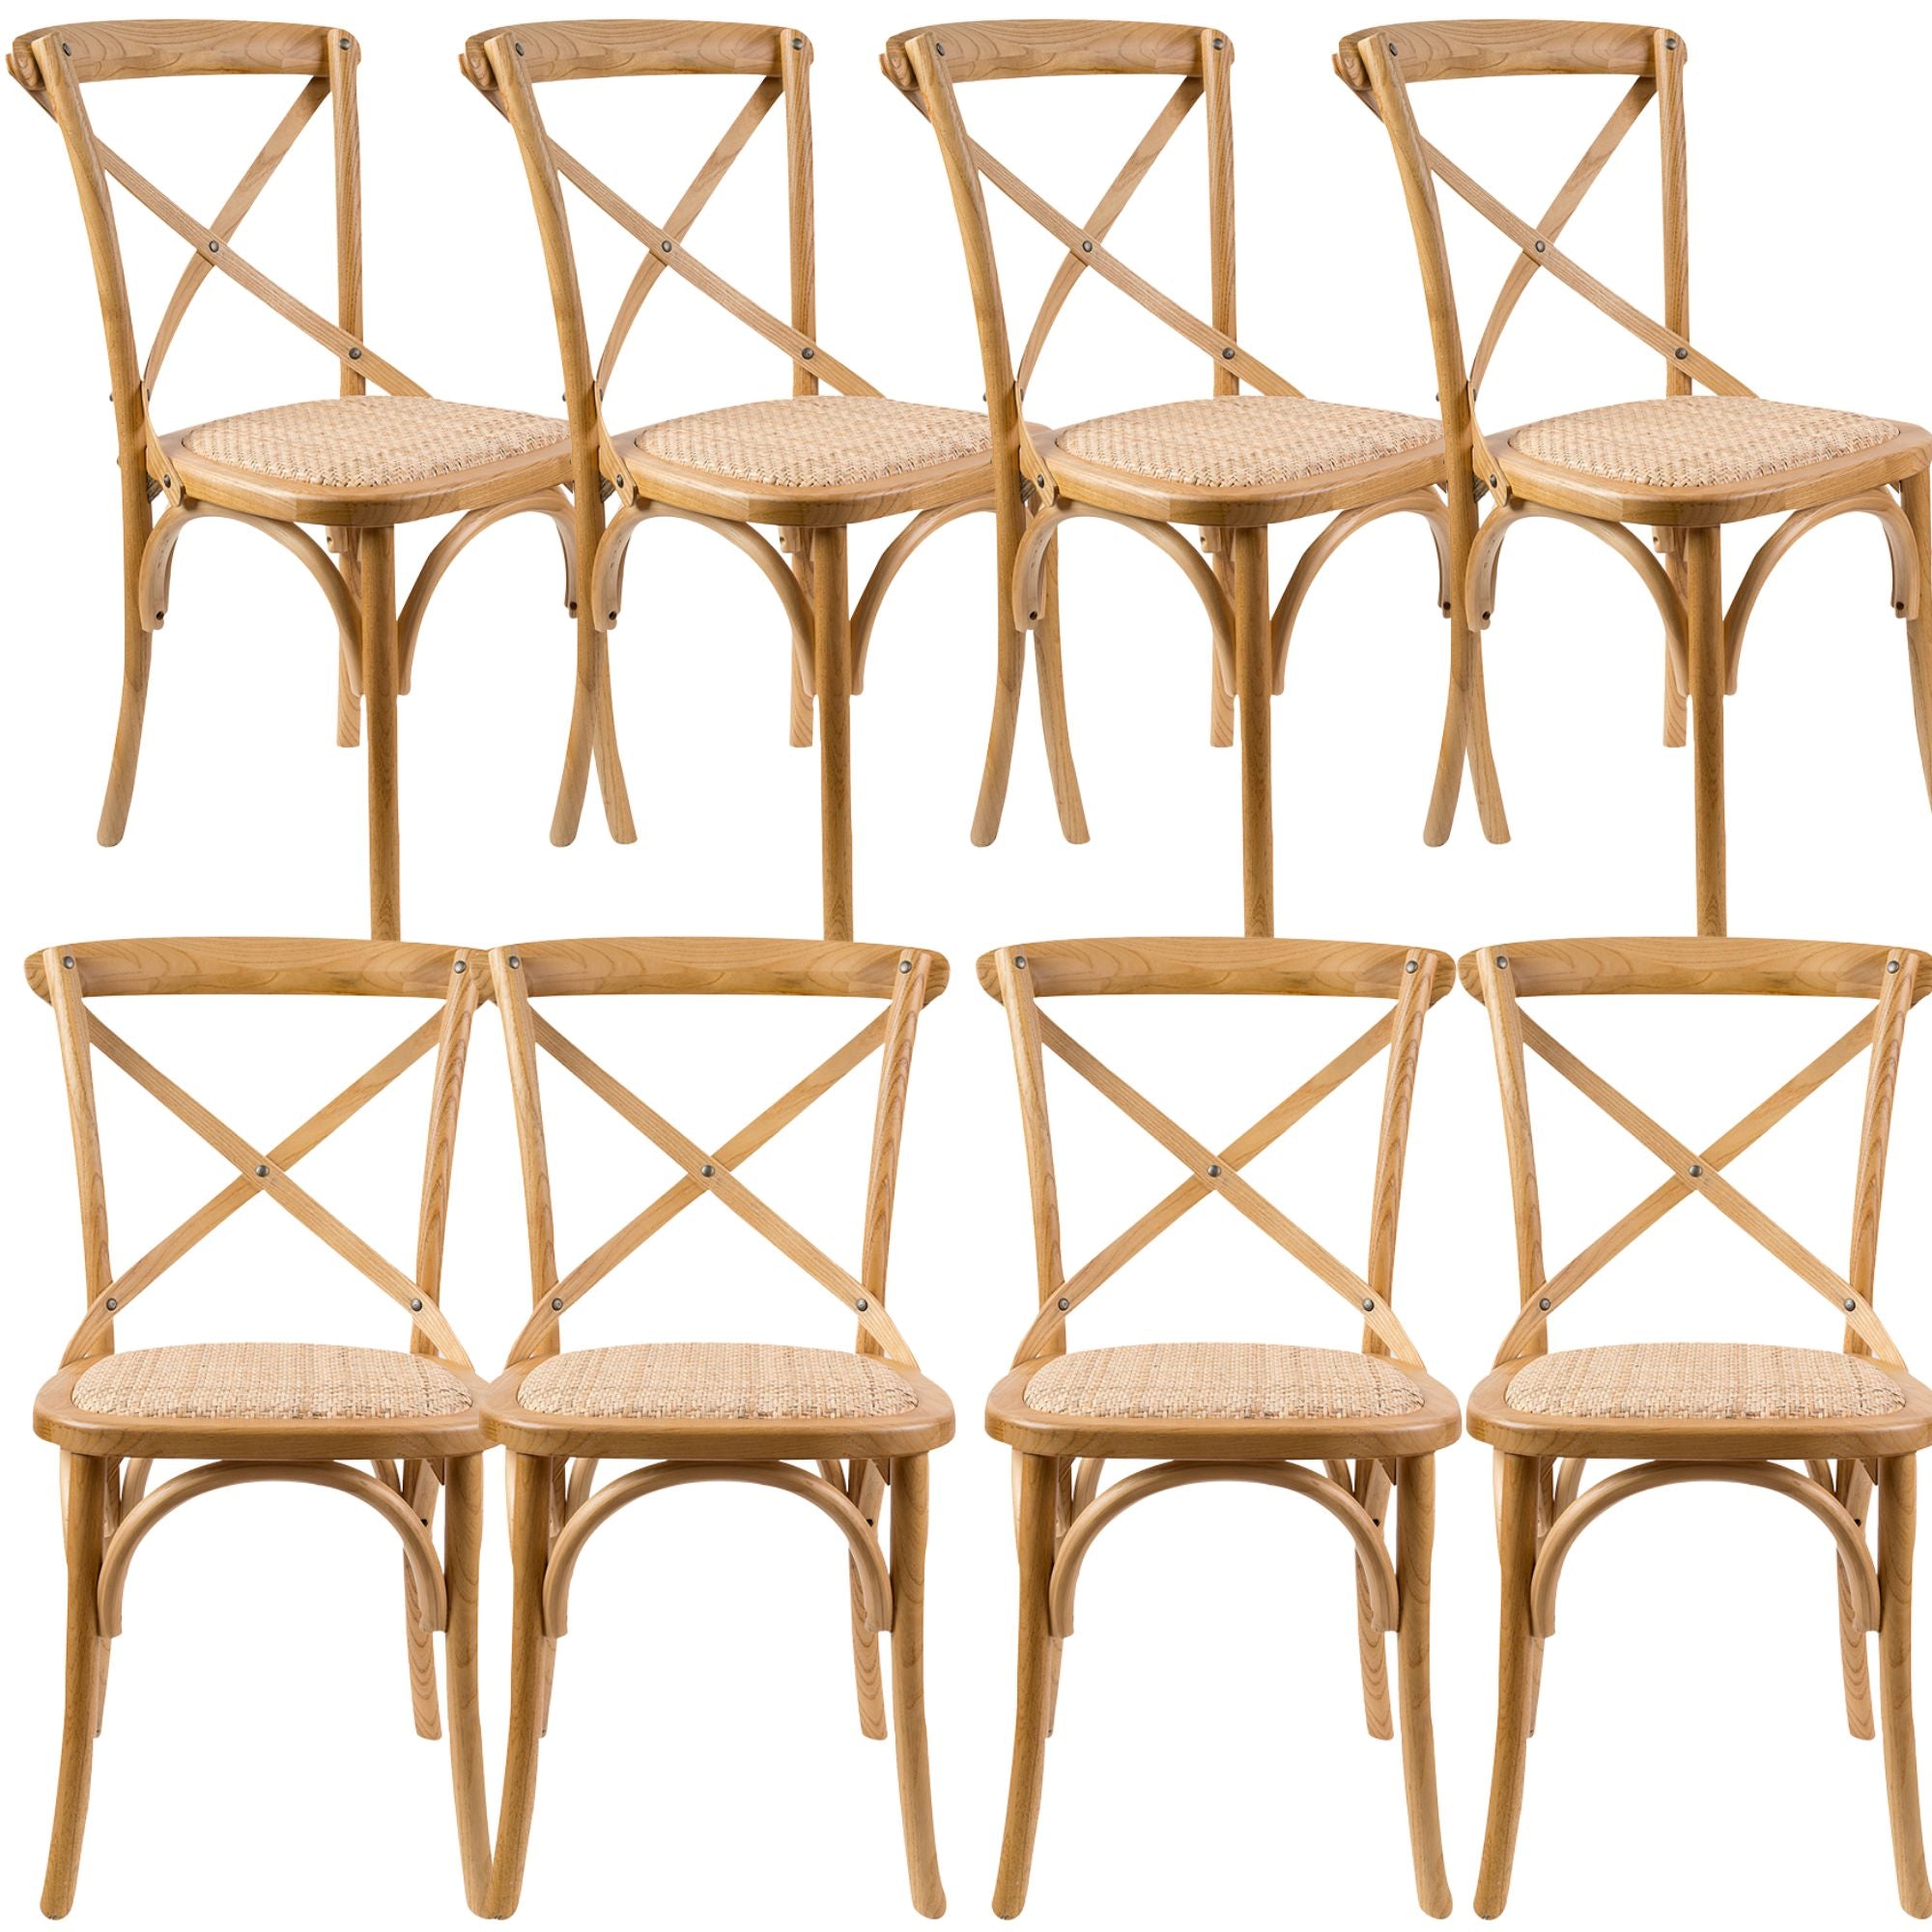 aster-crossback-dining-chair-set-of-8-solid-birch-timber-wood-ratan-seat-oak